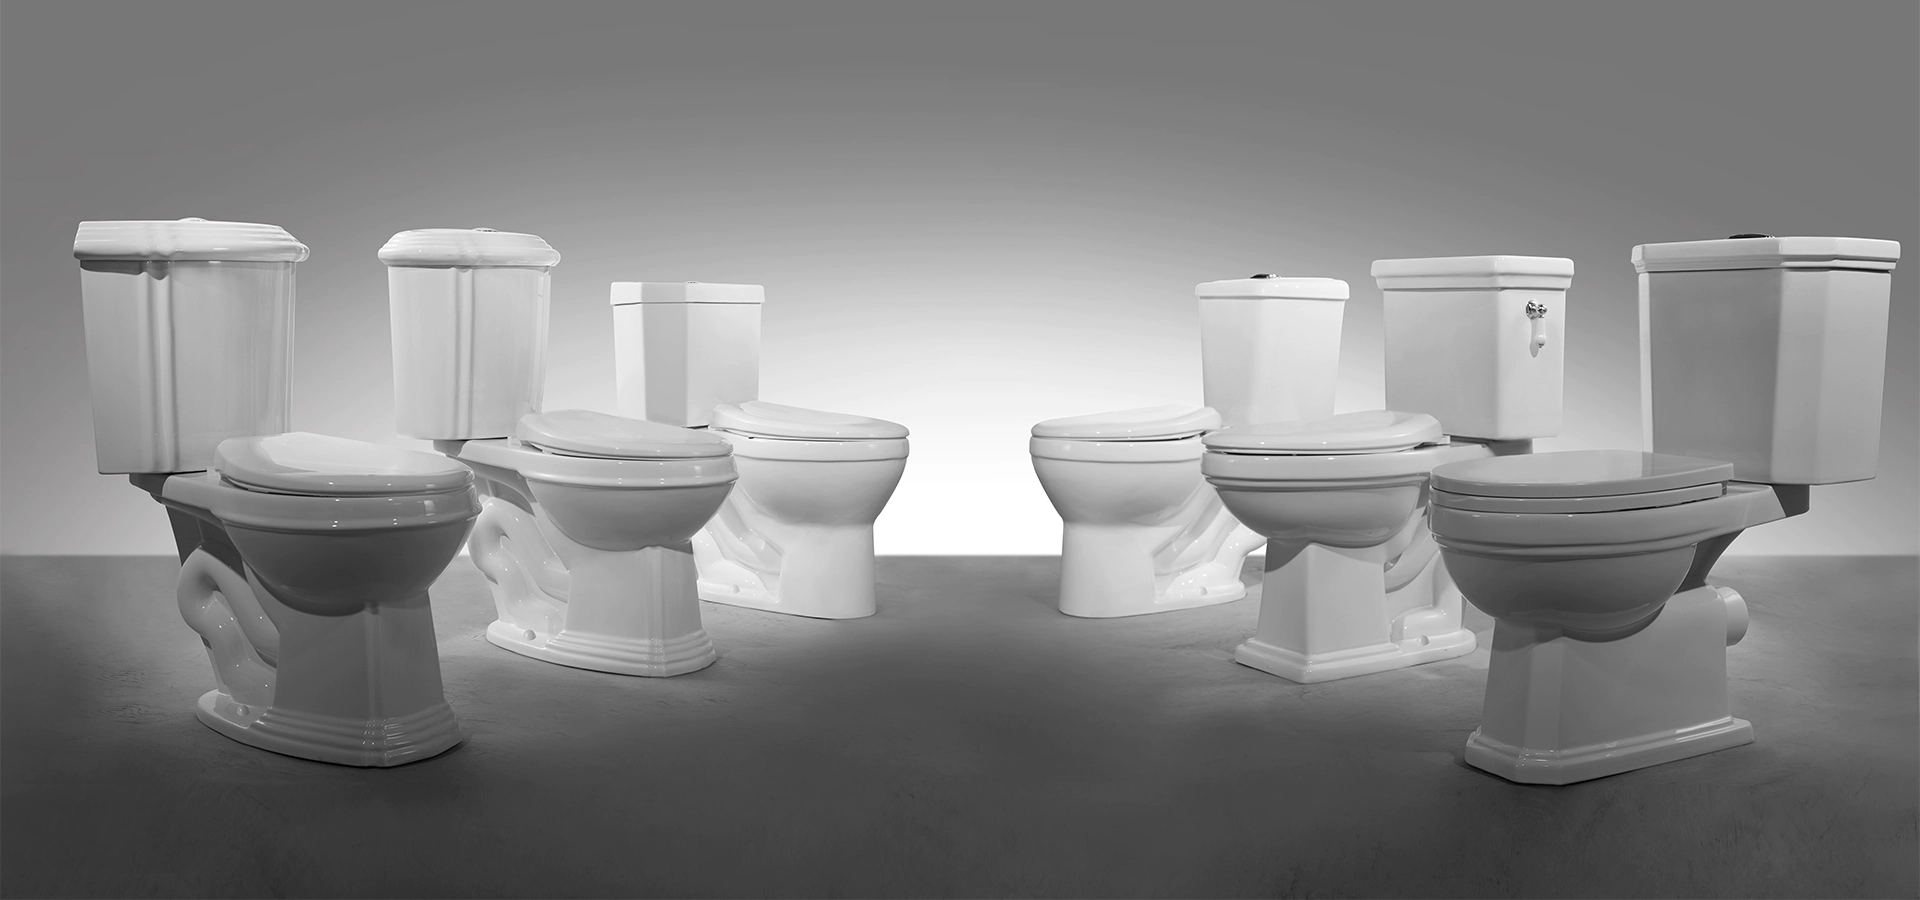 Meilong Ceramics Company is one of the largest toilet suppliers in China 